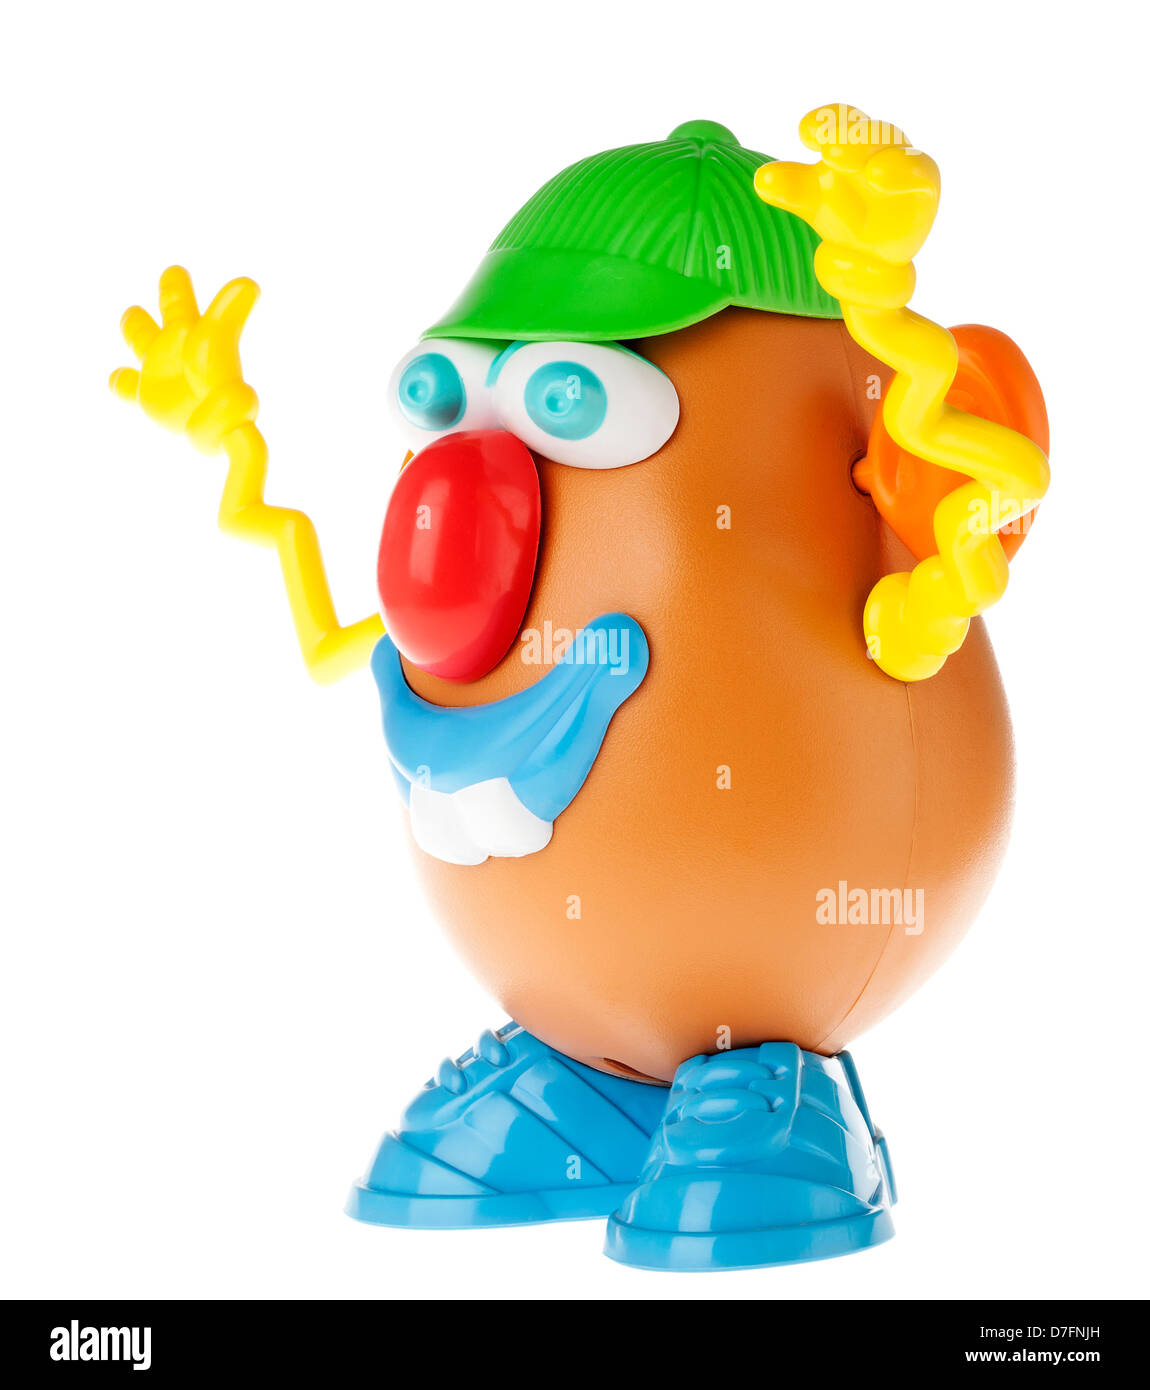 Tel-Aviv Israel - January 25th 2012: Isolated on white studio shot famous toy Mr. Potato Head by Hasbro company. This time Stock Photo